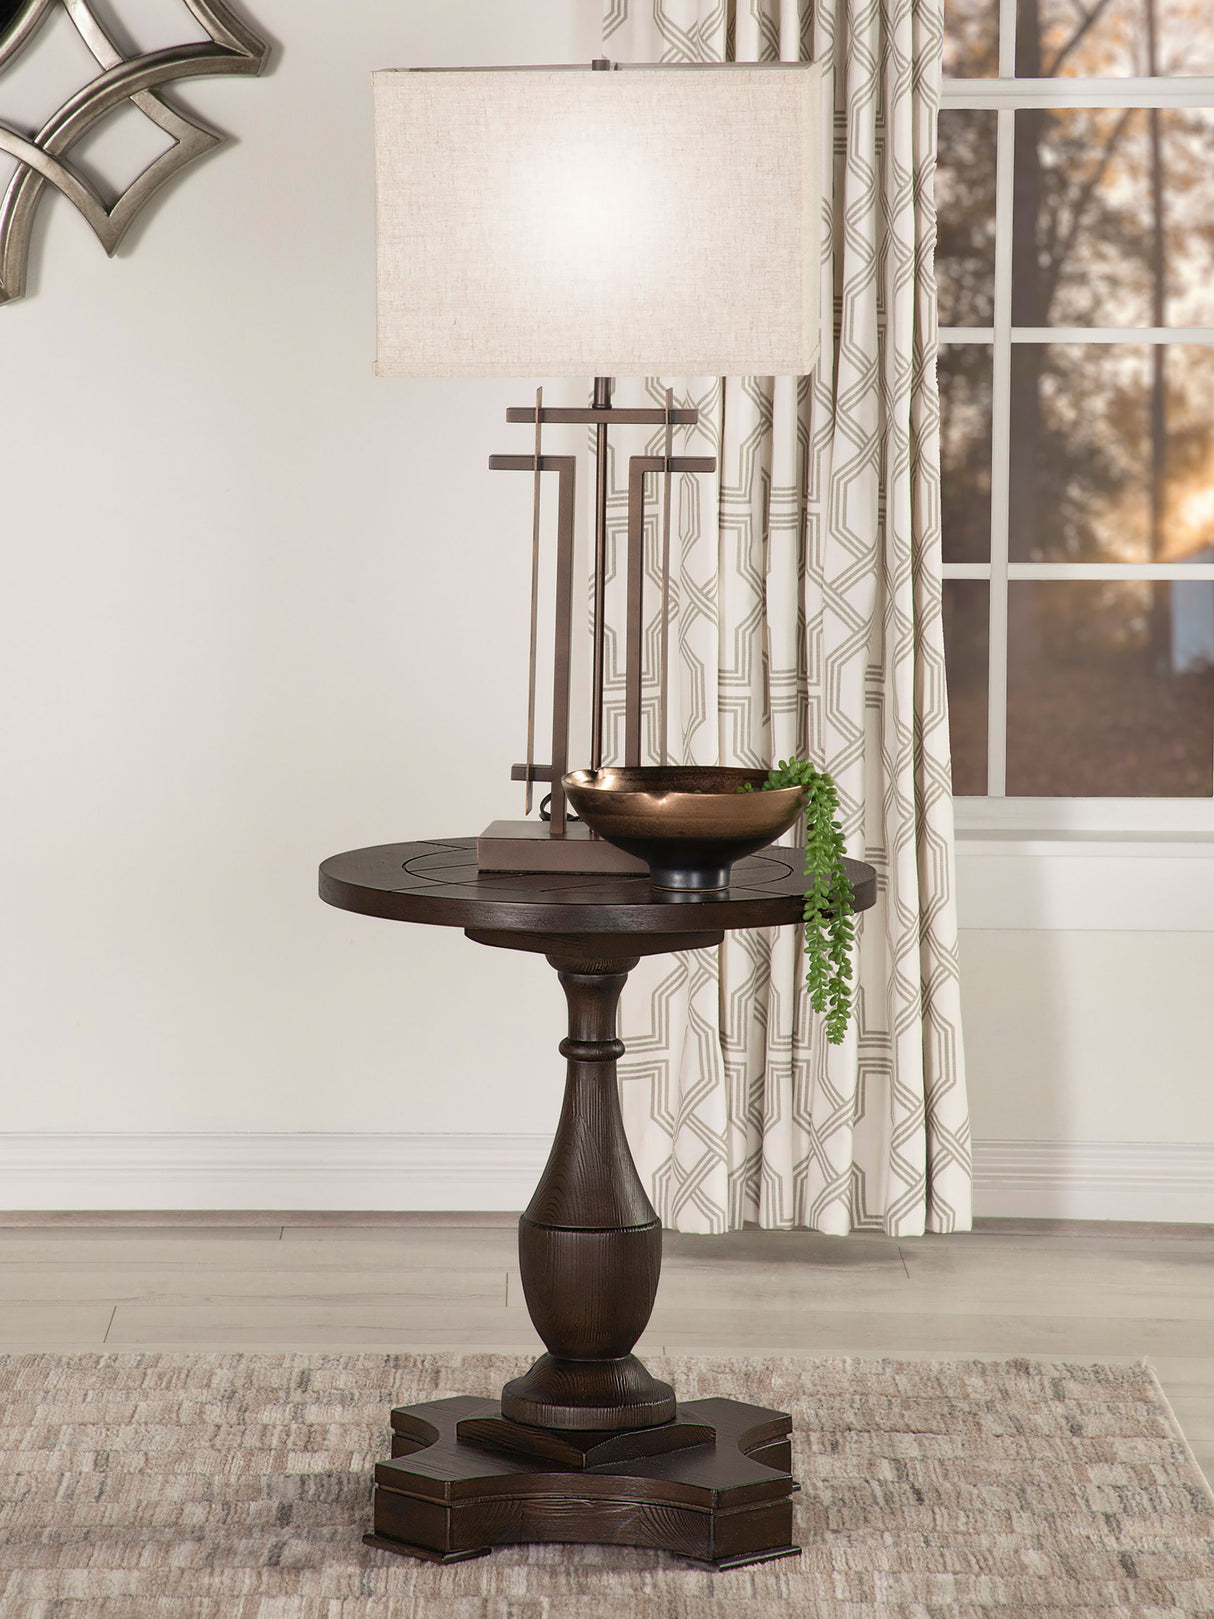 End Table - Morello Round End Table with Pedestal Base Coffee